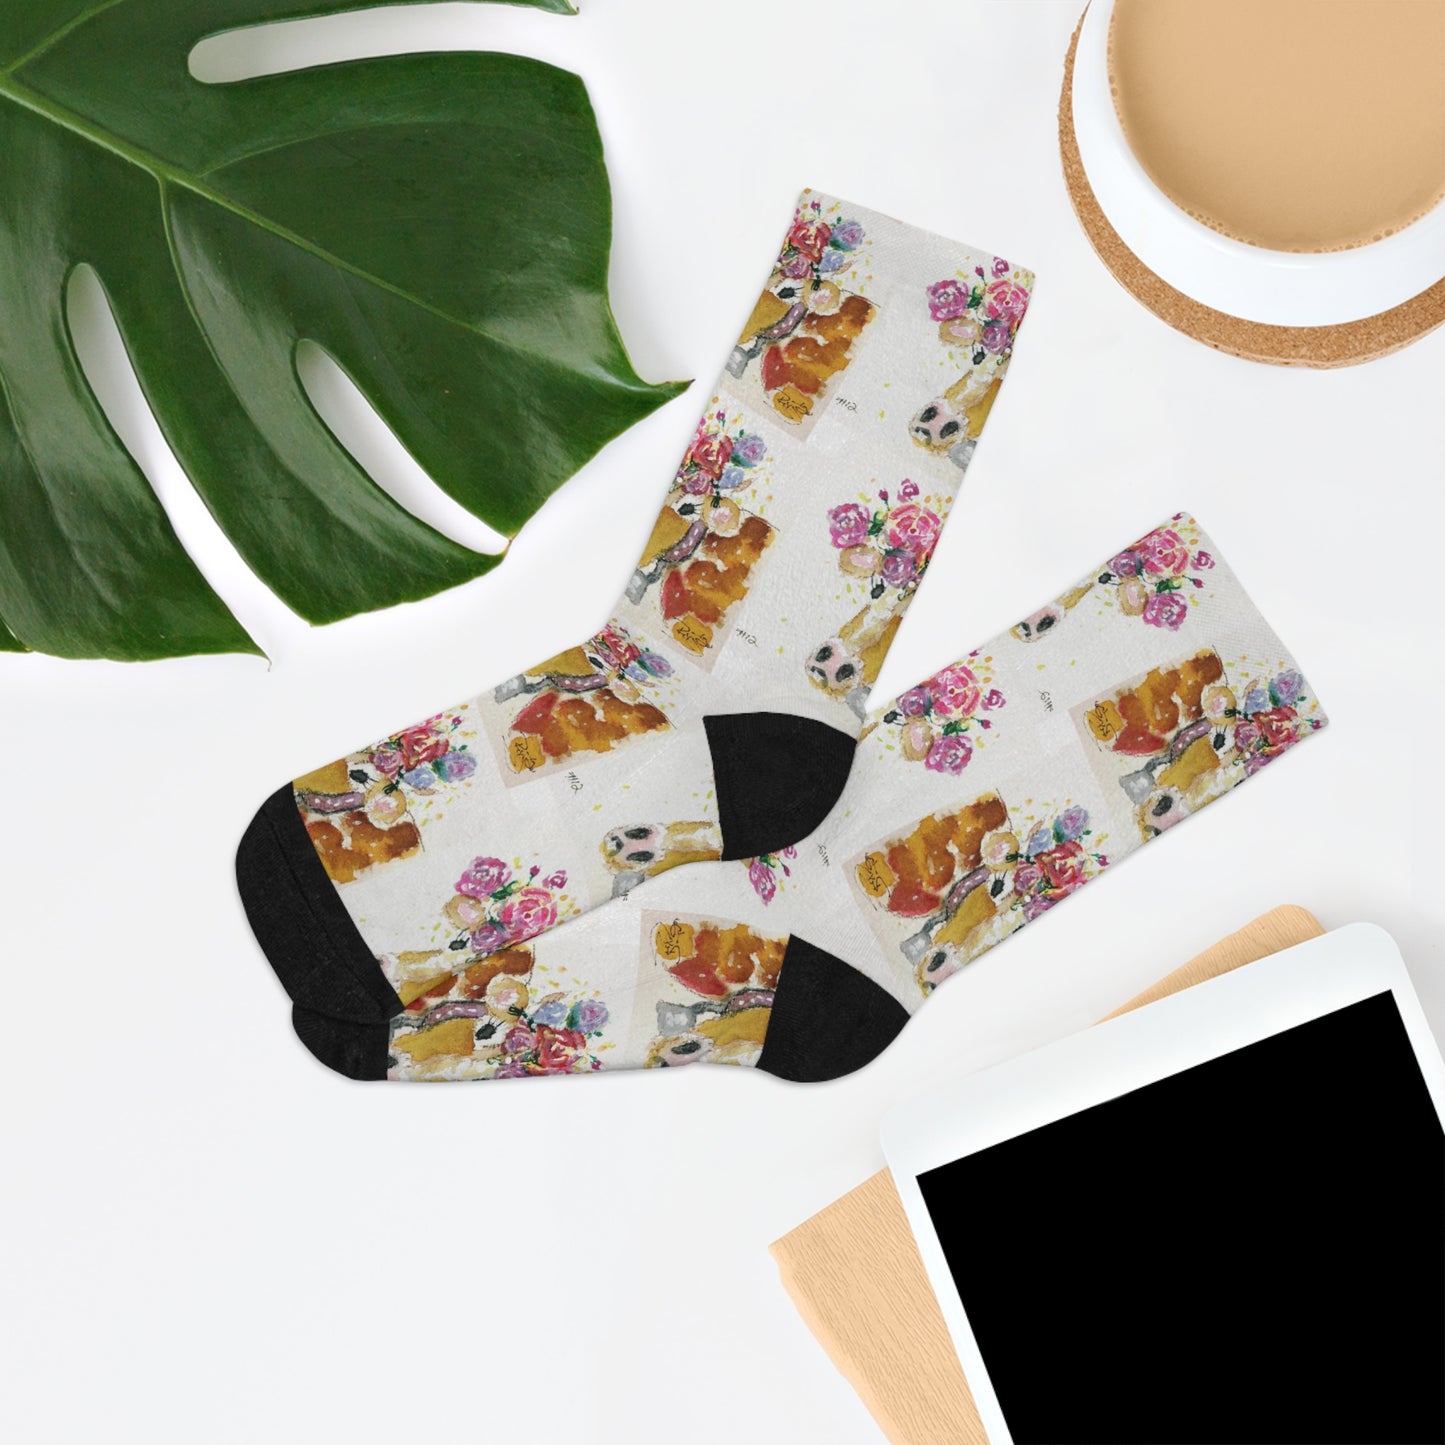 Adorable Whimsical Cow with Roses on Head Socks